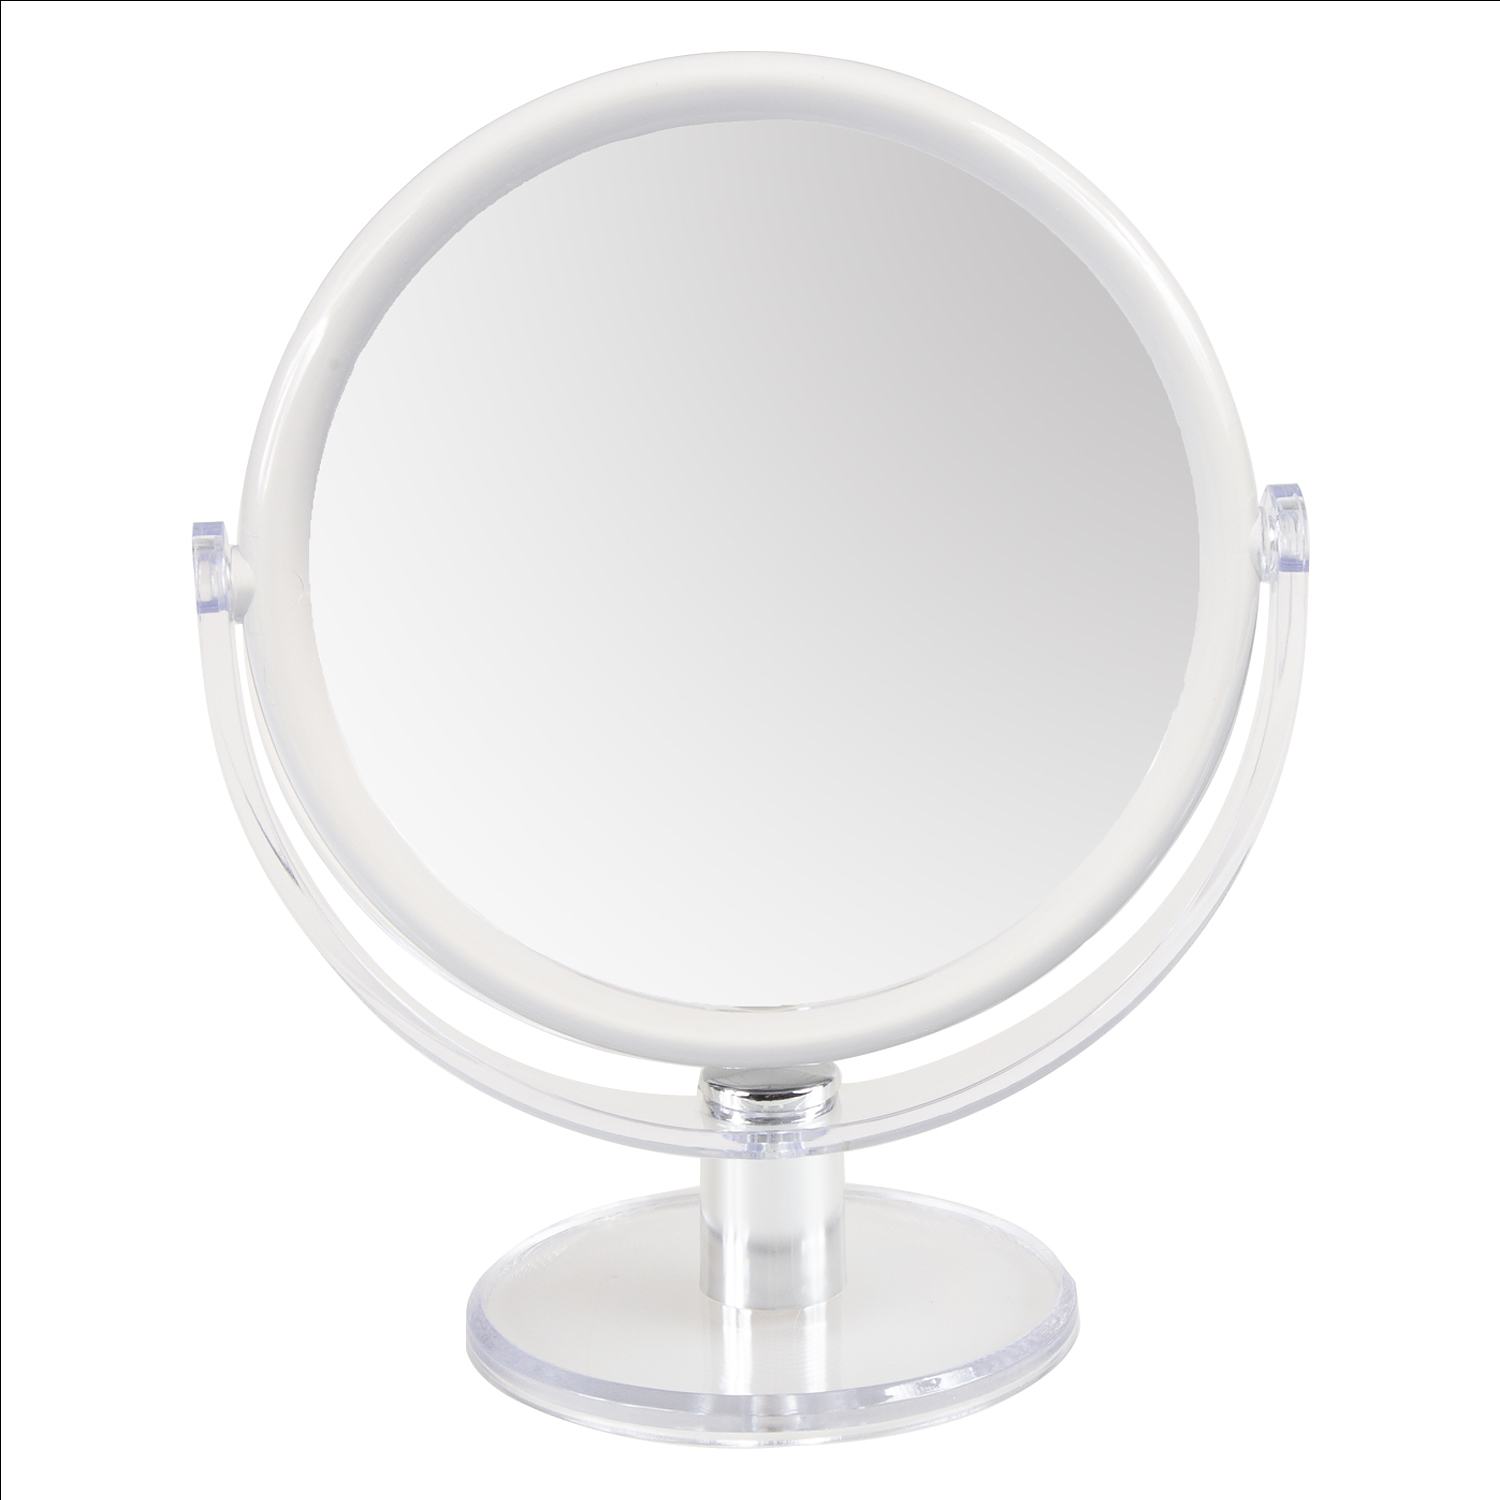 Double sided makeup mirror 1x and 10x